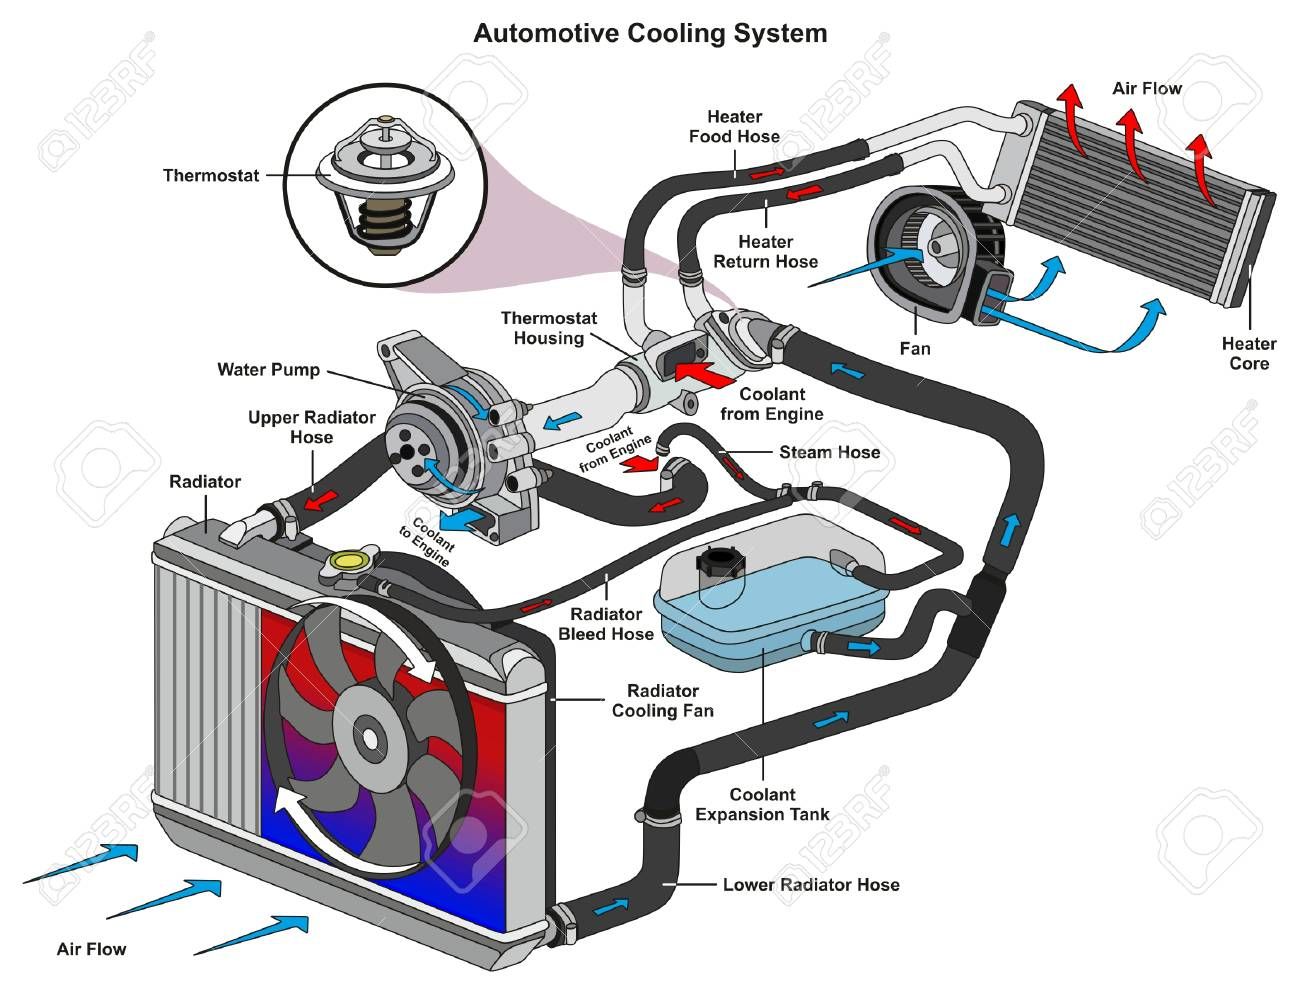 Why do we need a coolant alarm?